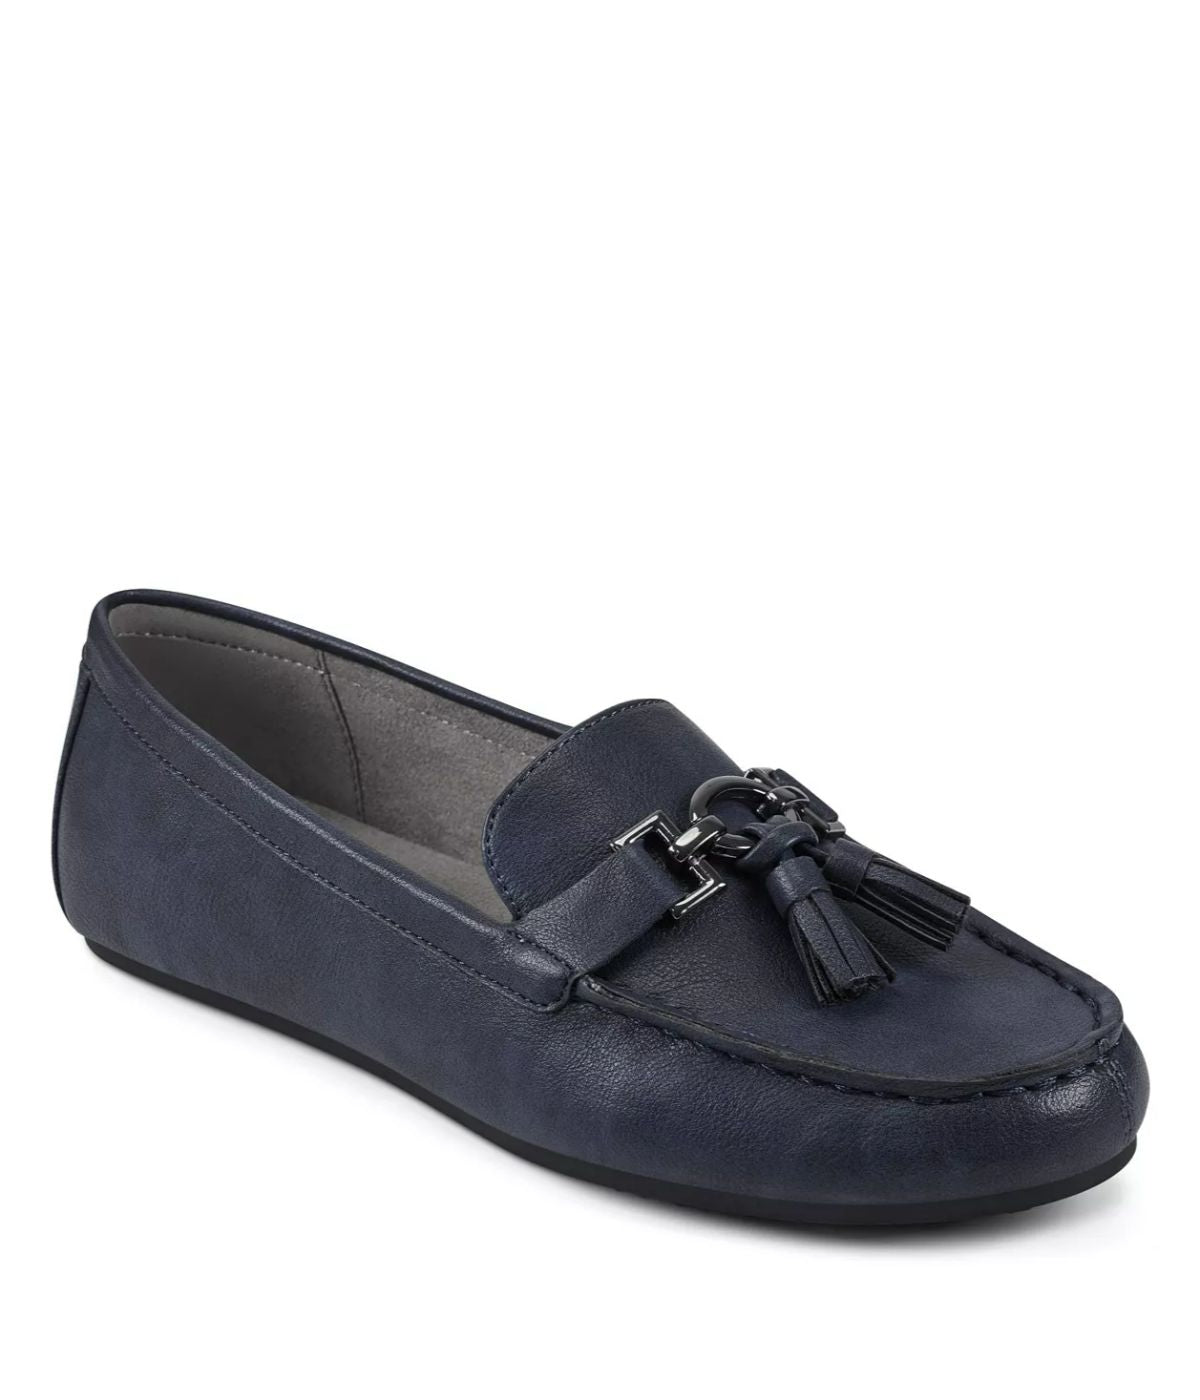 Aerosoles Deanna Loafer Navy Faux Suede